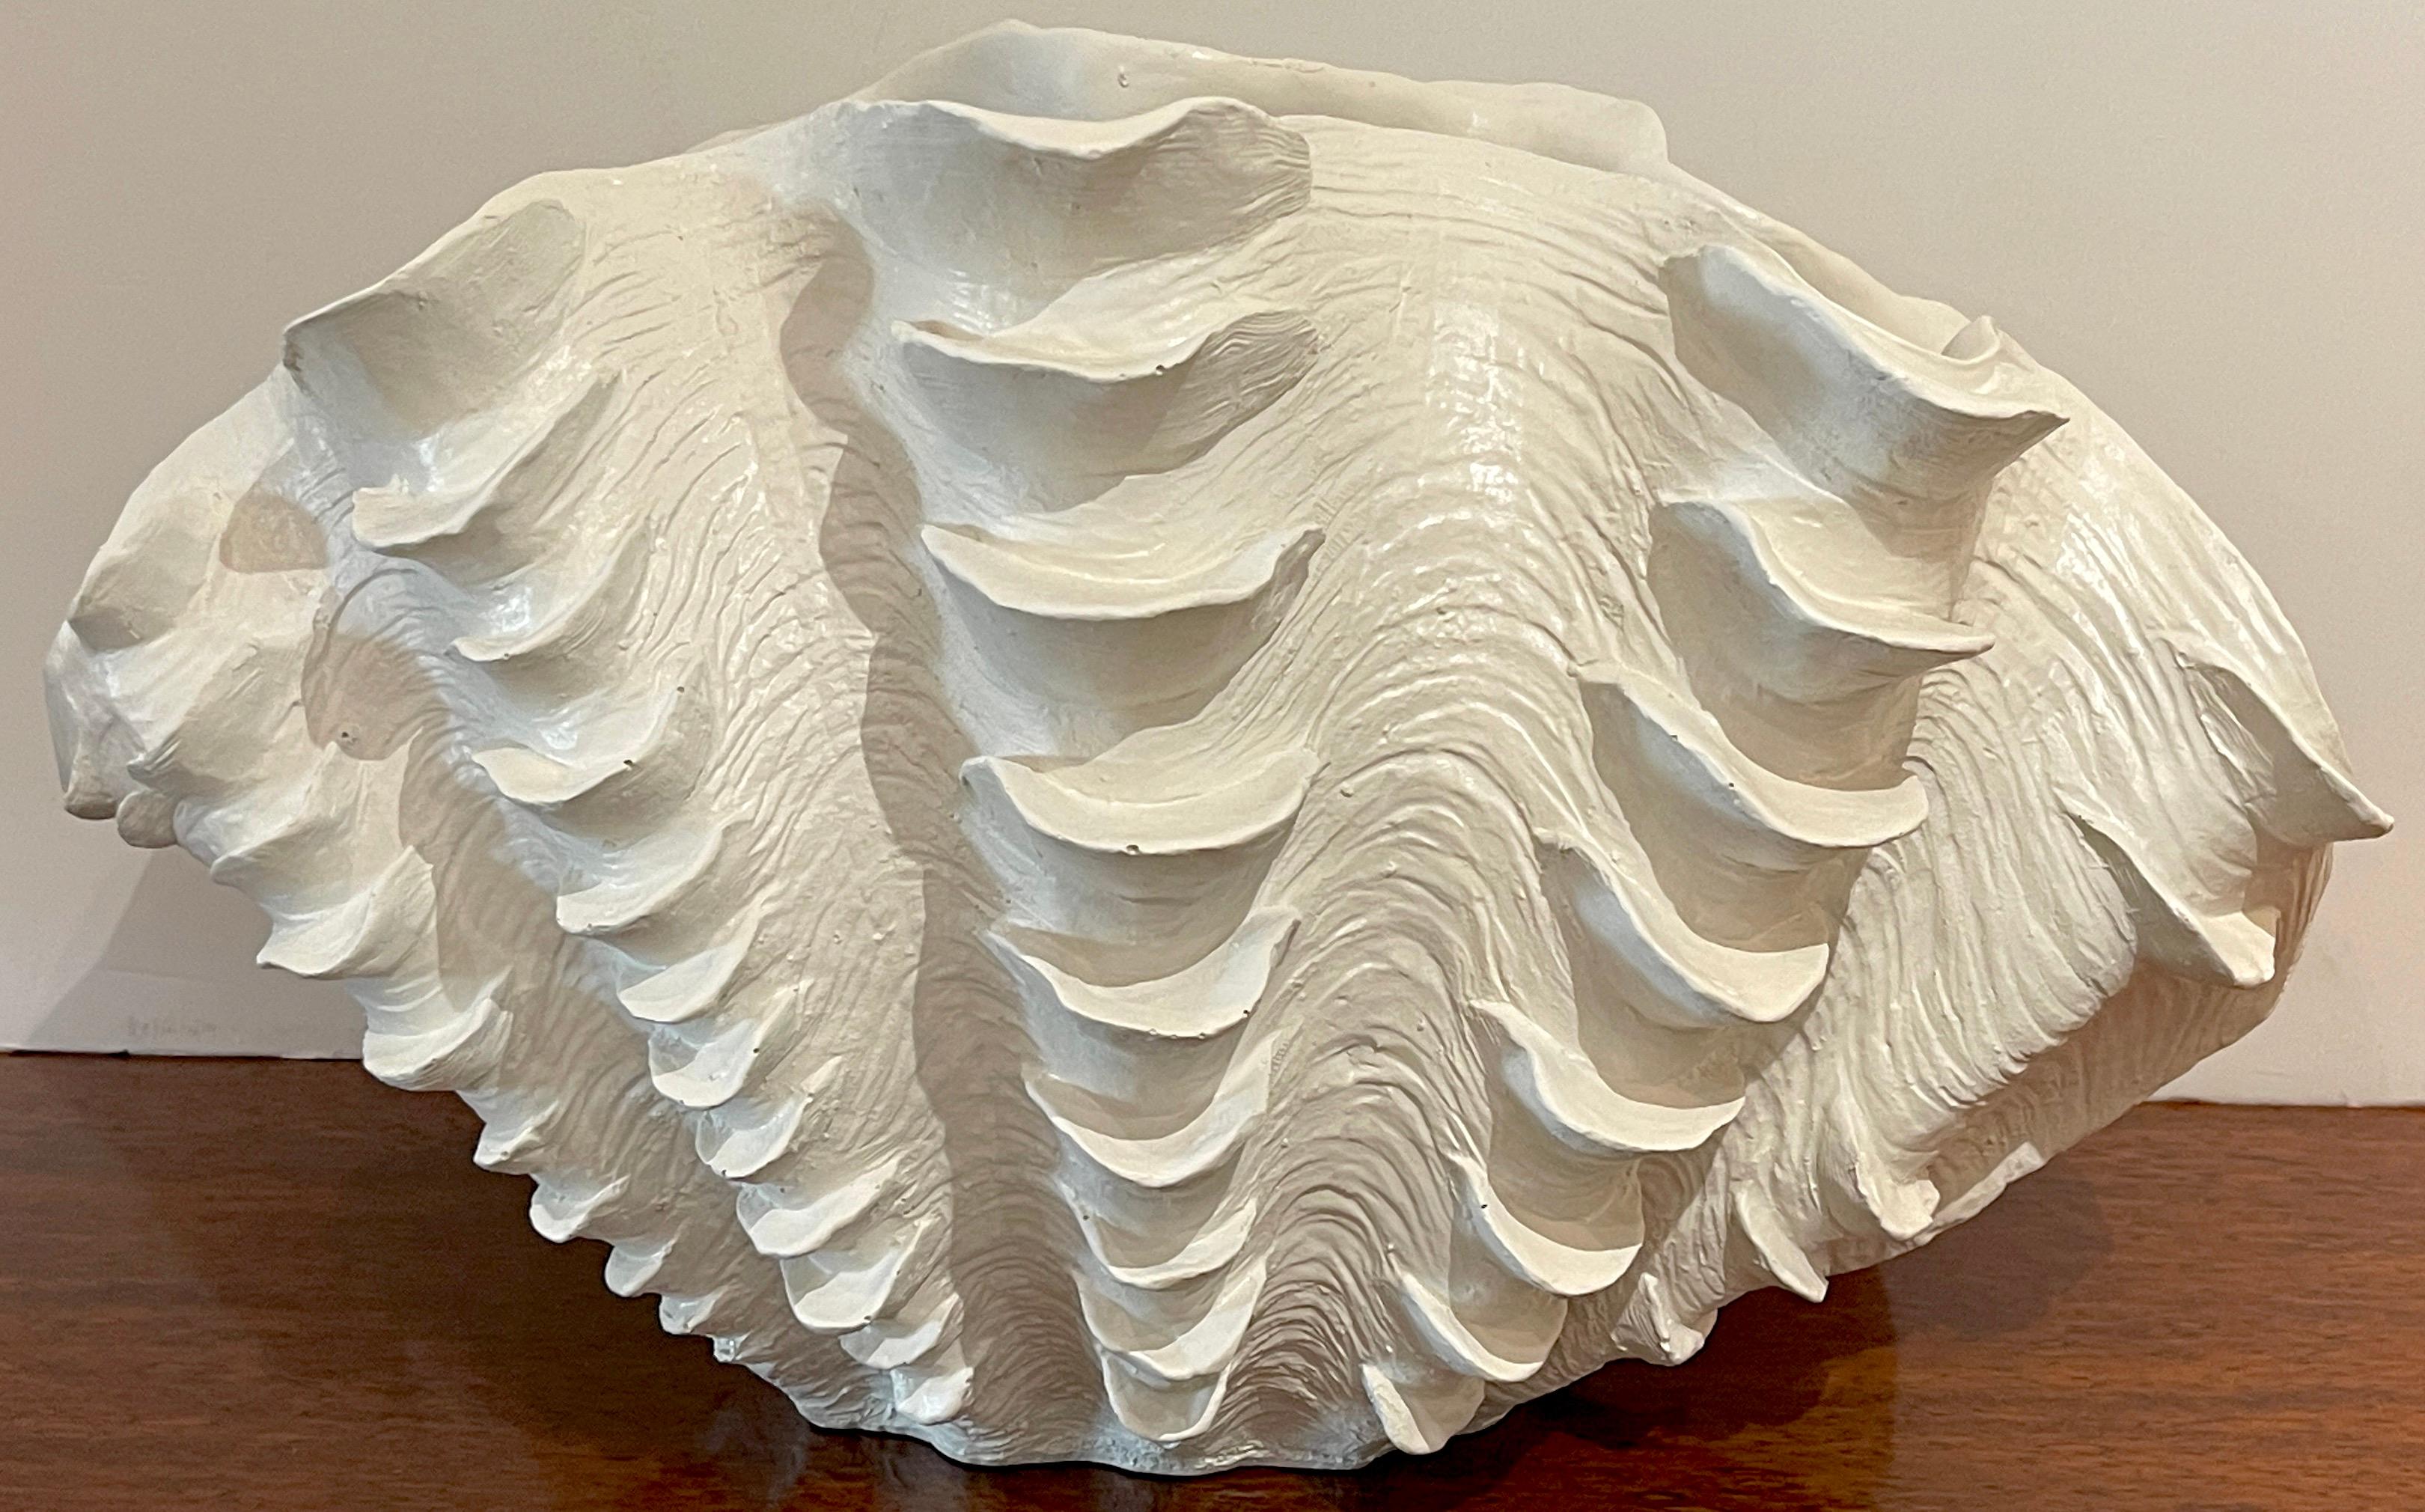 Mid century lacquered Giant Clam (Tridacna Gigas) shell vase
A large realistically modeled and white lacquered vase, can be used upright or on its side as a natural semi-opened clam shell.
The base measures 7-Inches wide x inches deep
Overall